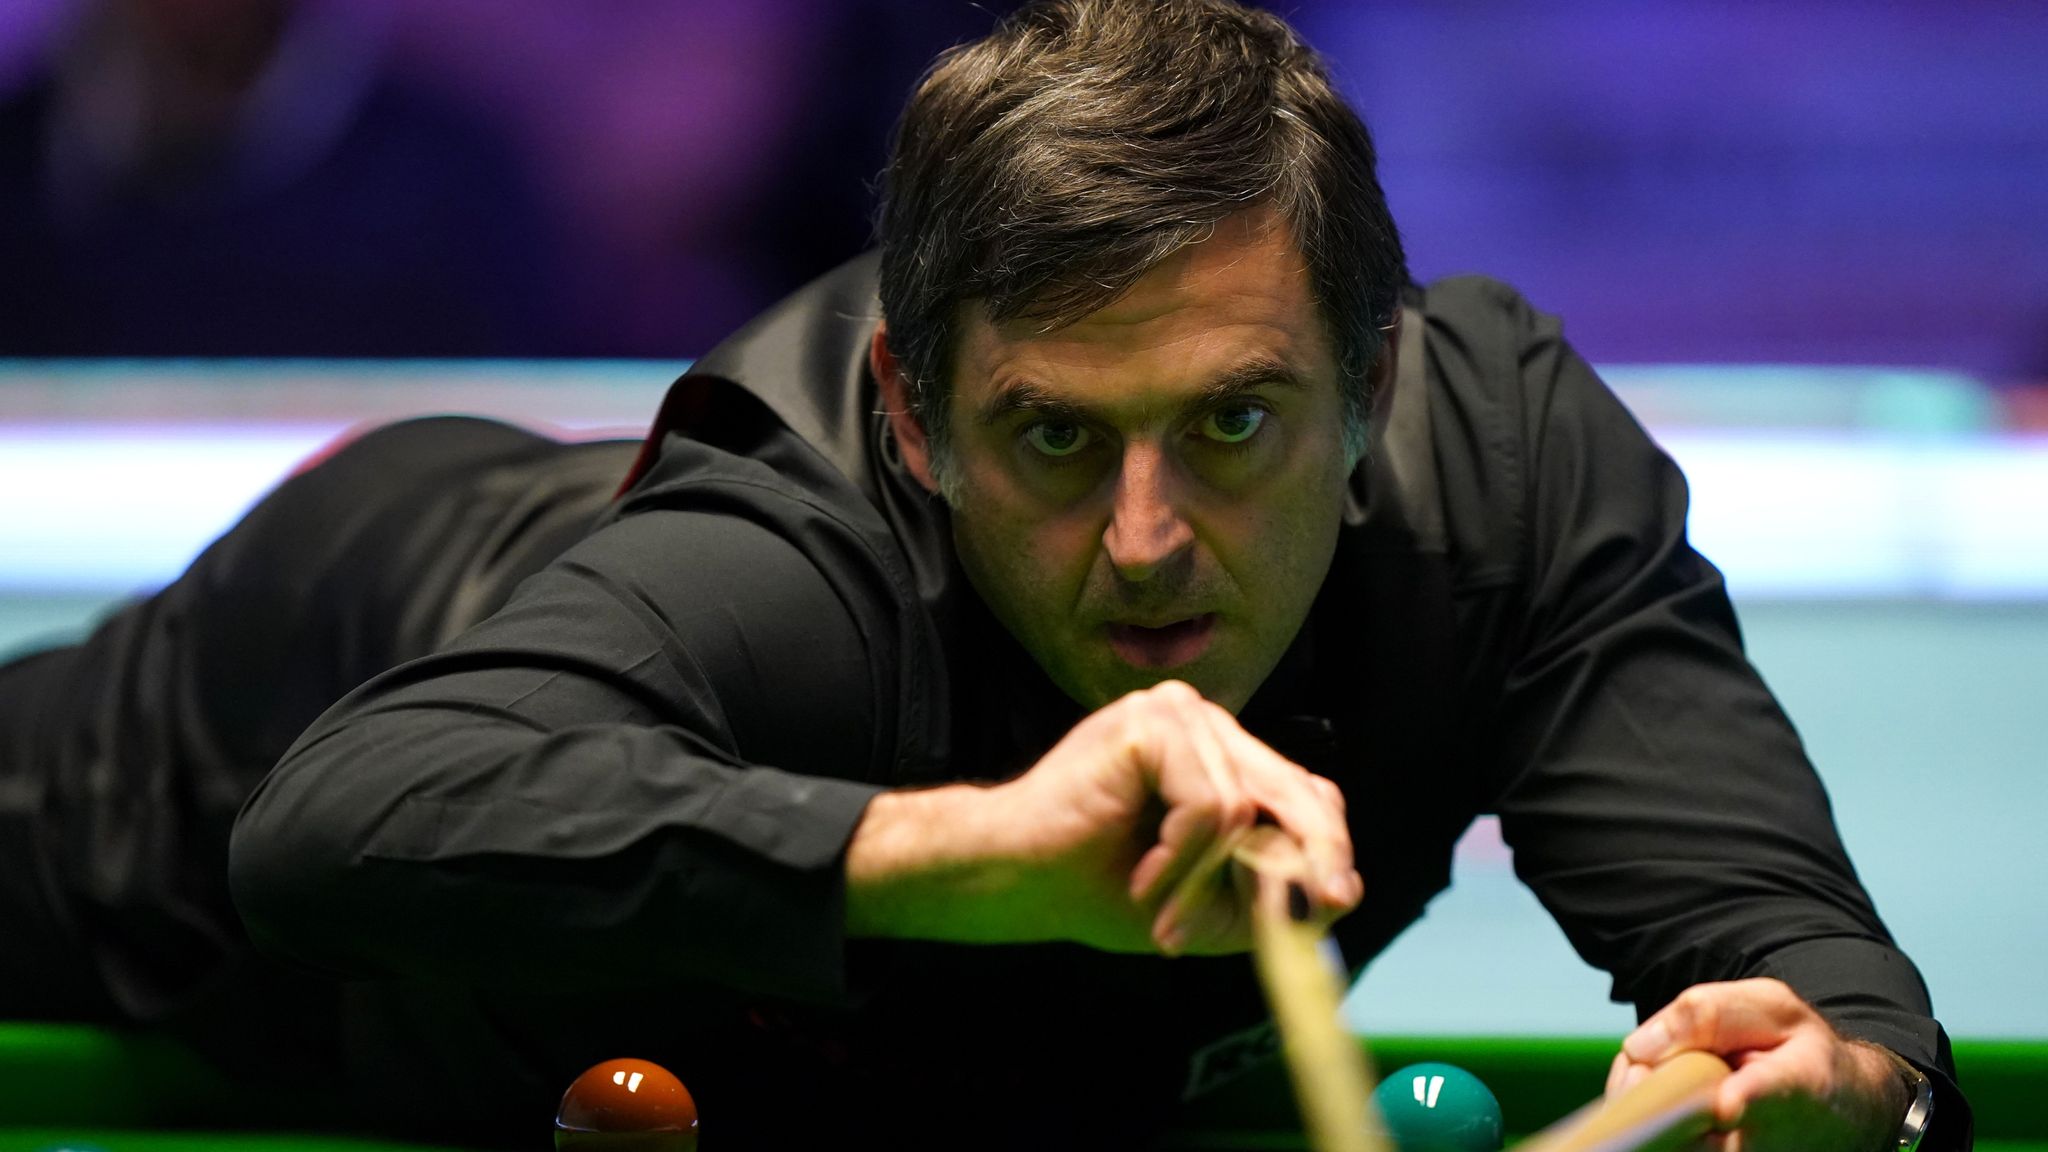 Ronnie OSullivan looking for eighth world snooker title after up-and-down season on and off the table Snooker News Sky Sports